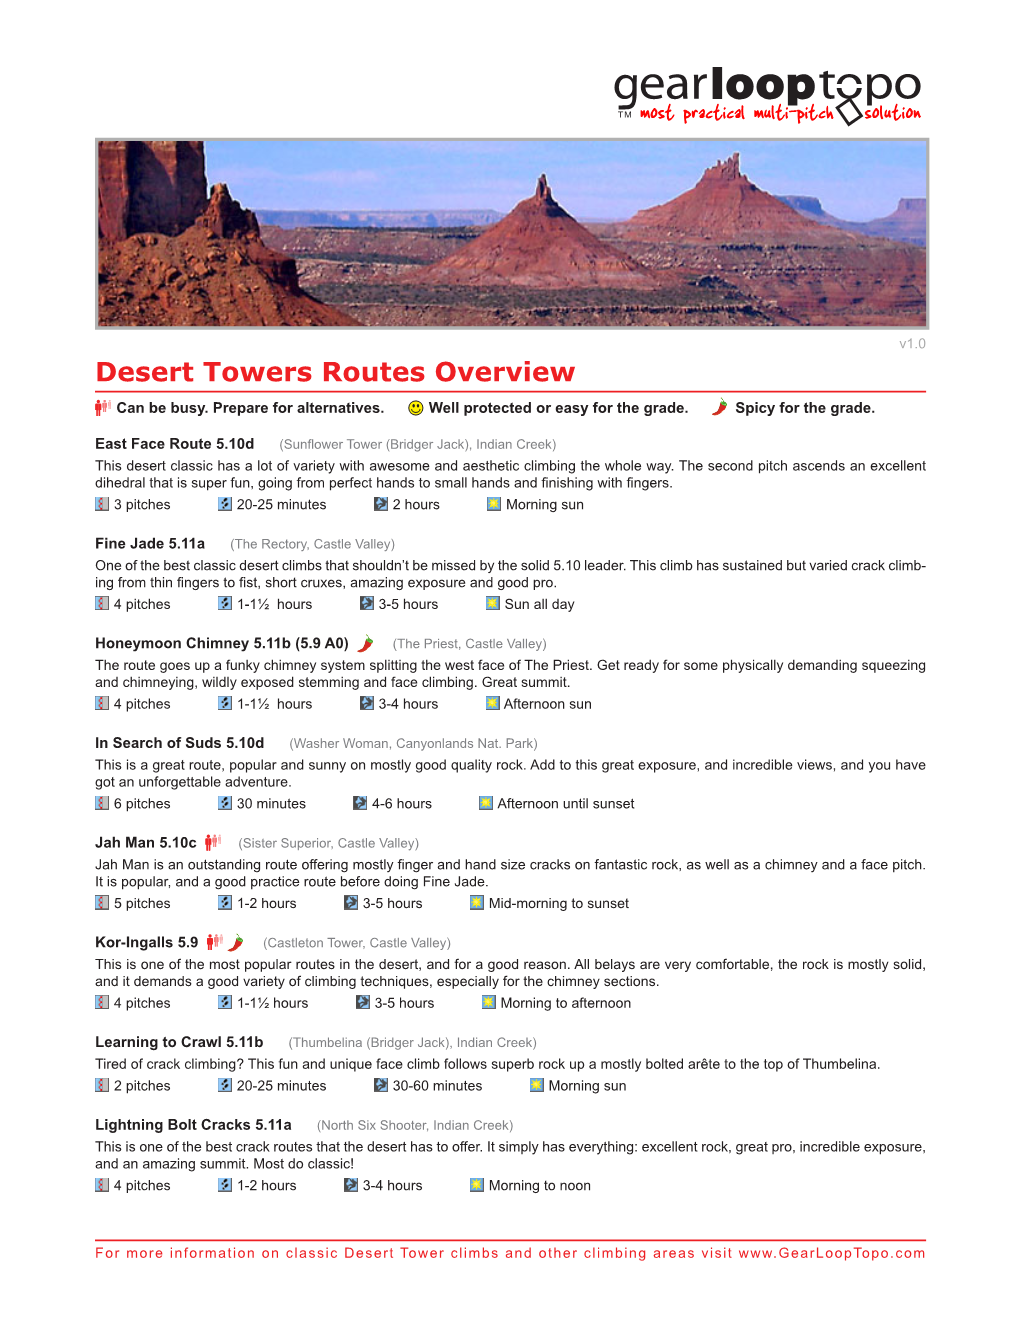 Desert Towers Routes Overview